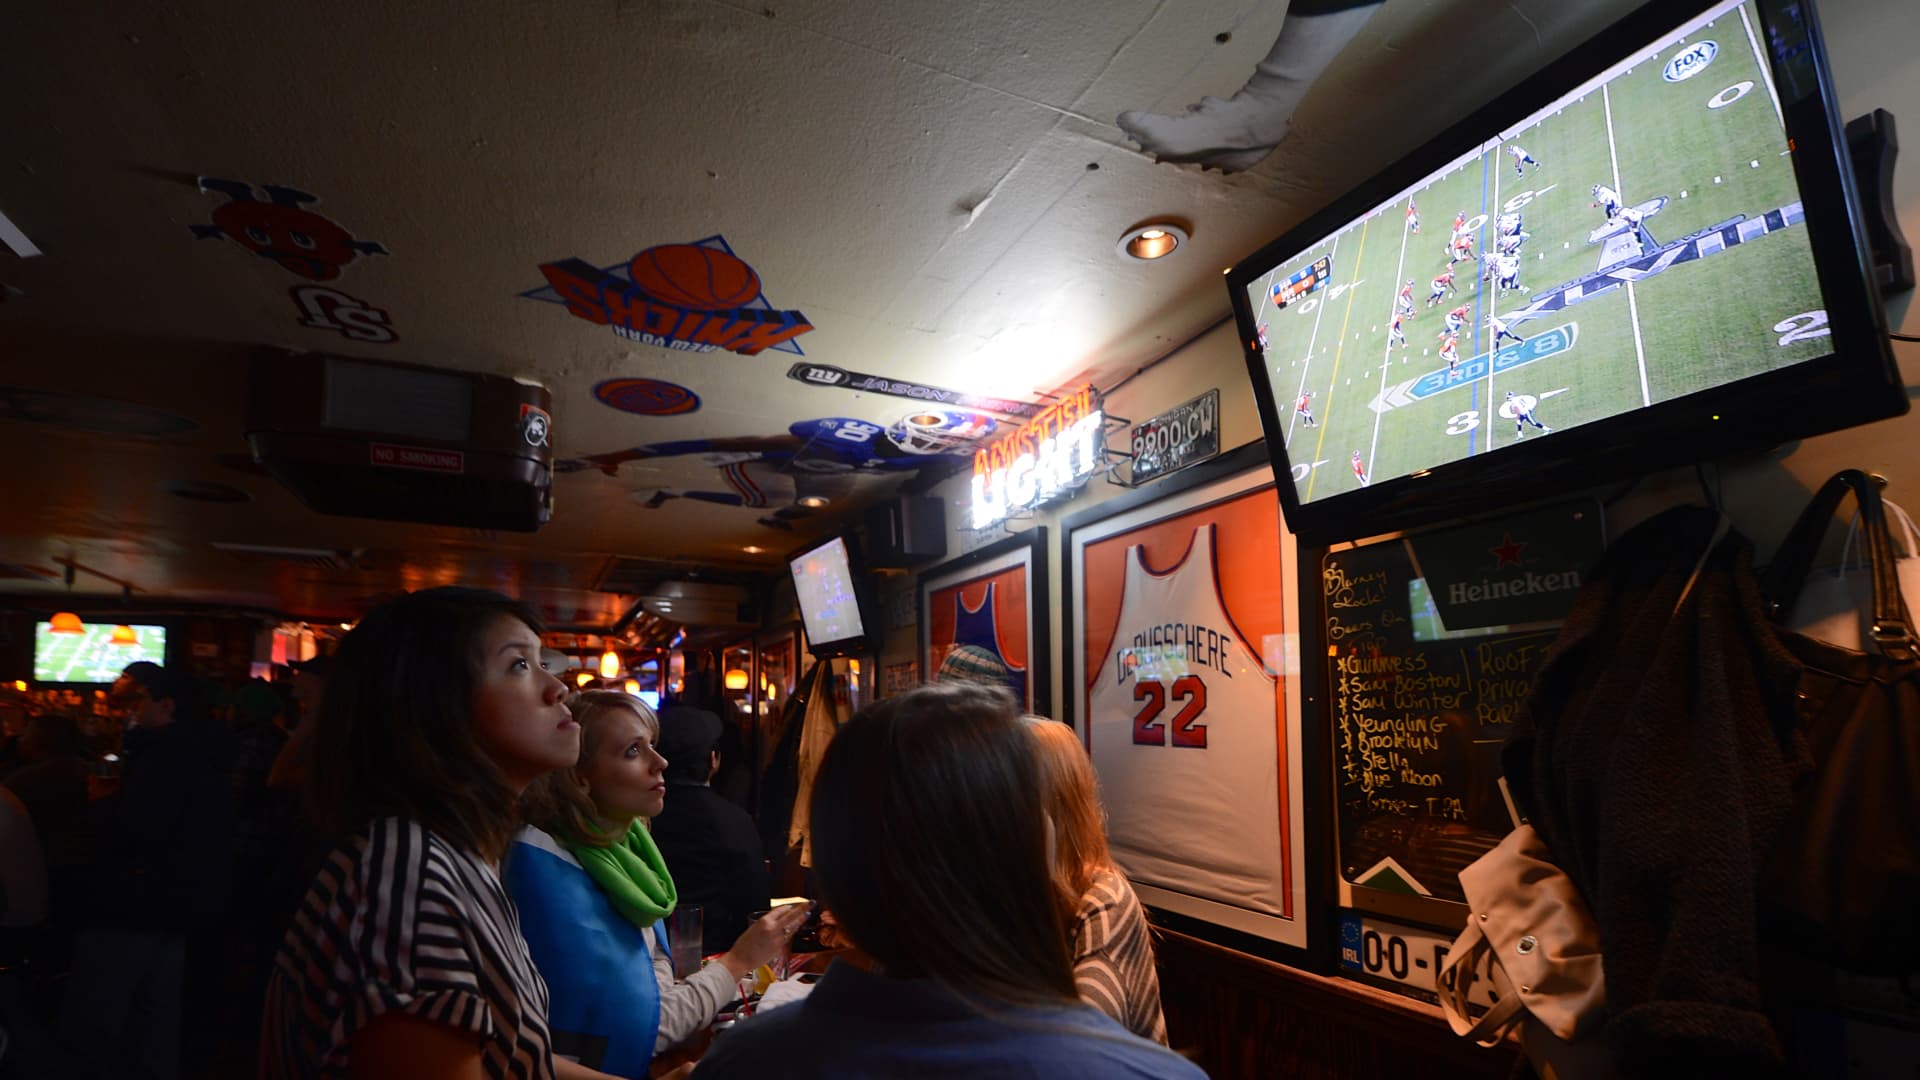 DirecTV reaches deal to supply NFL ‘Sunday Ticket’ to bars and eating places